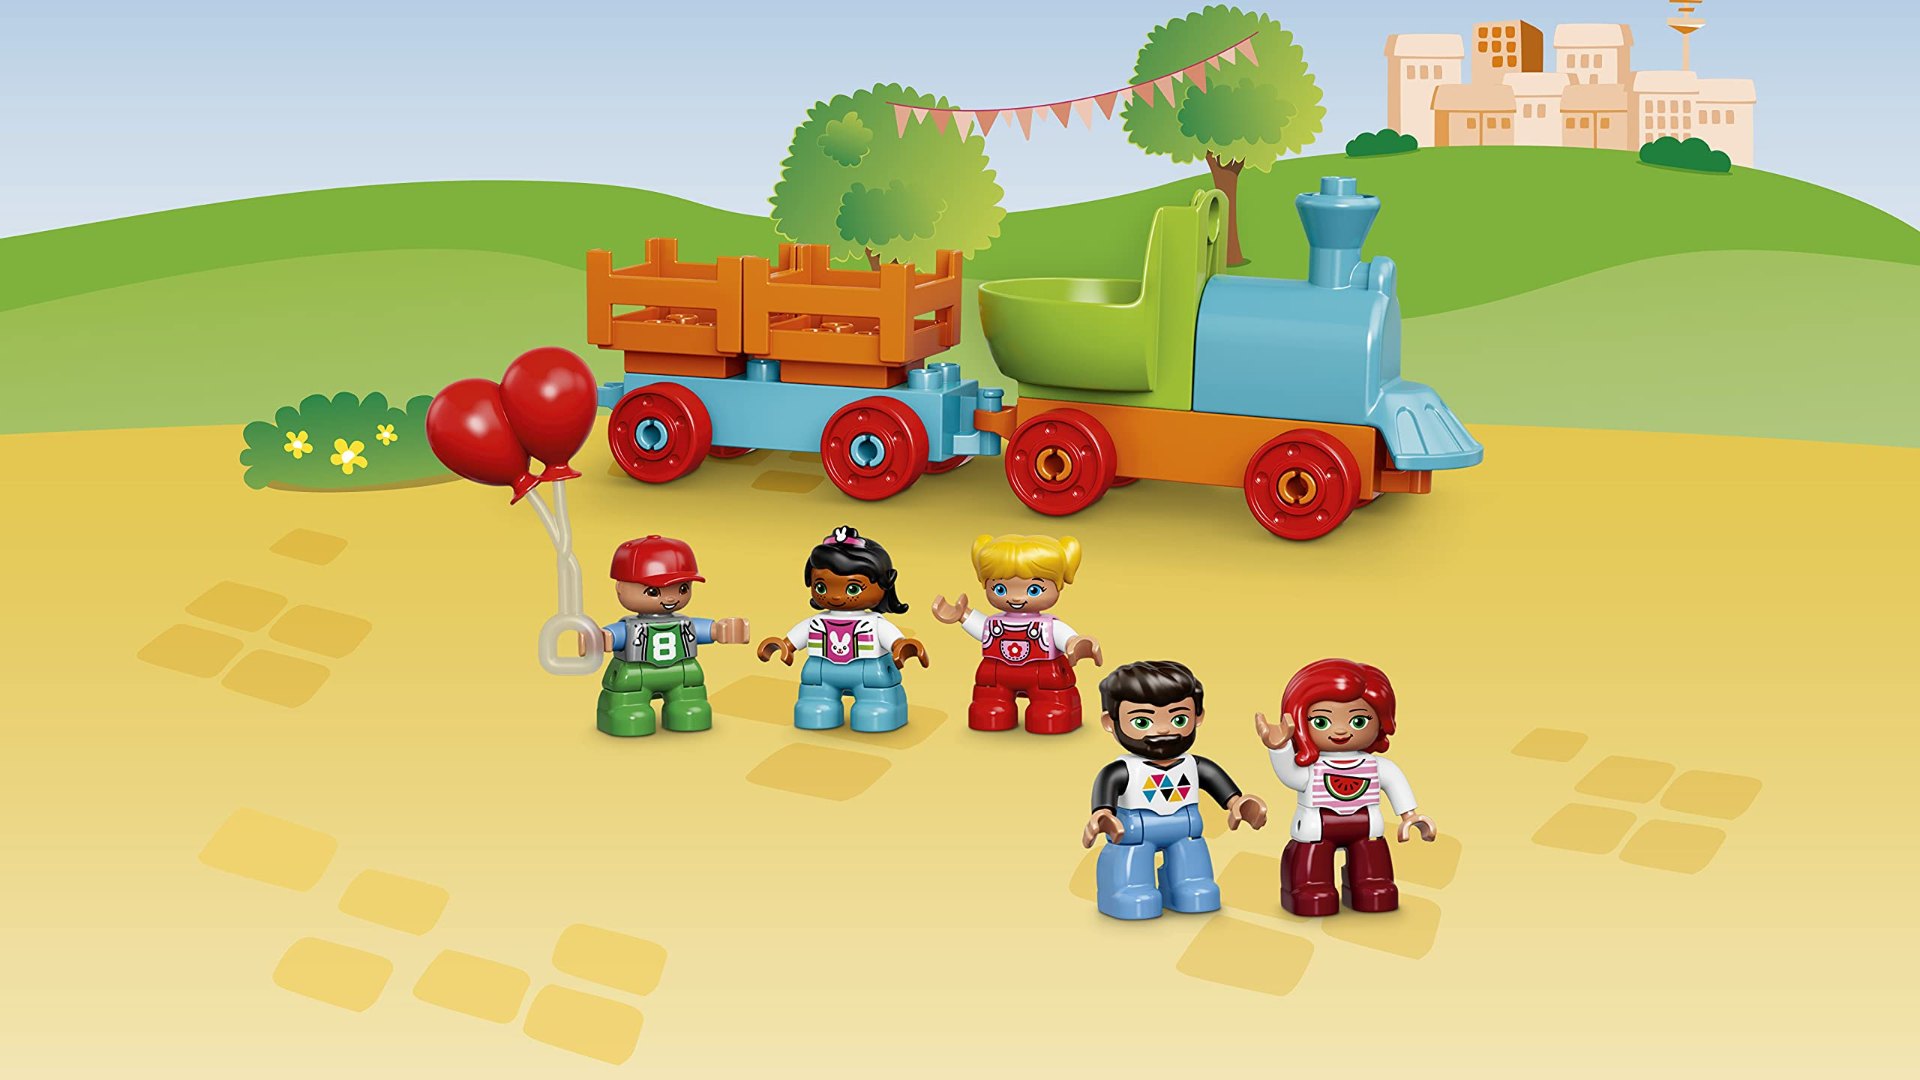 Lego Duplo World - Learn How to Get Stars